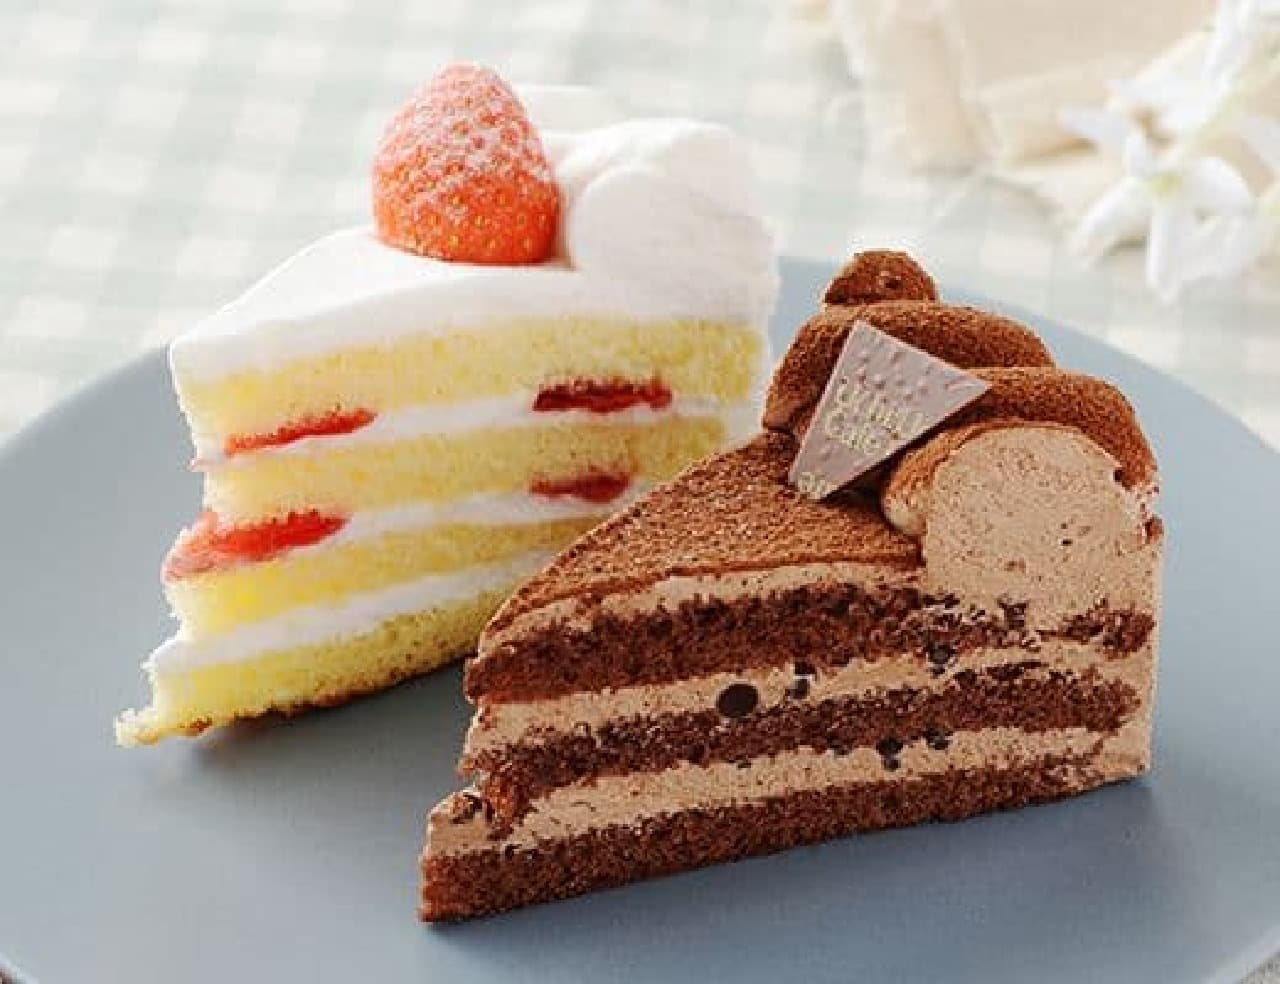 Lawson "Party Cake Strawberry & Chocolate"